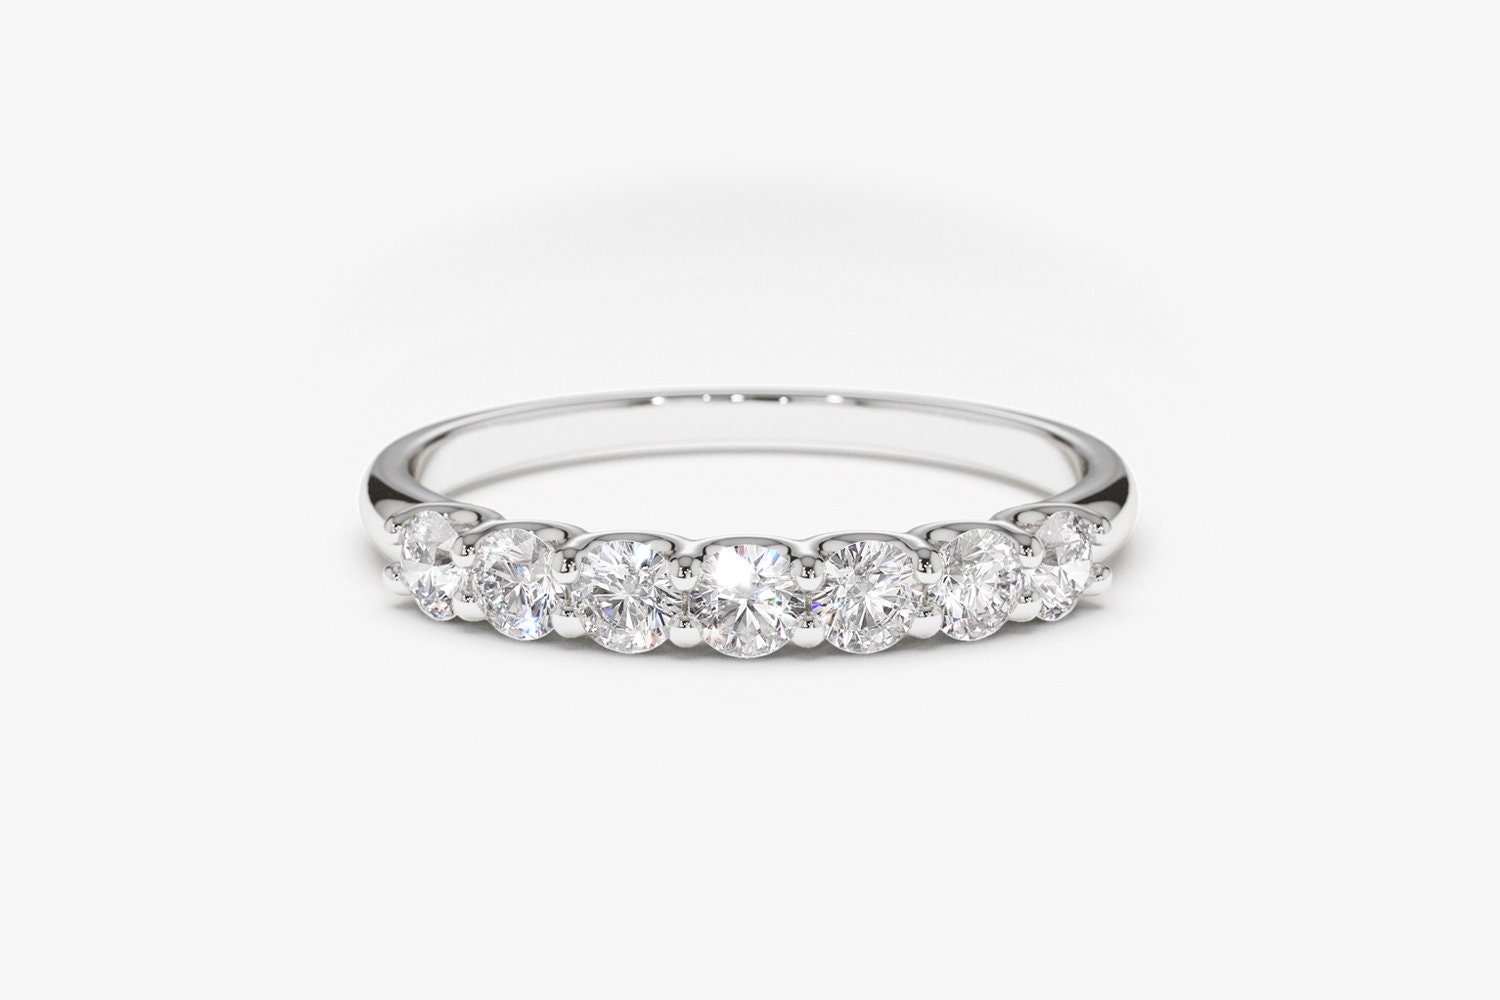 Details about   Dani by Daniel K Stunning 2.5 CT Round Clear CZ 925 Silver 14k Ring Size 7